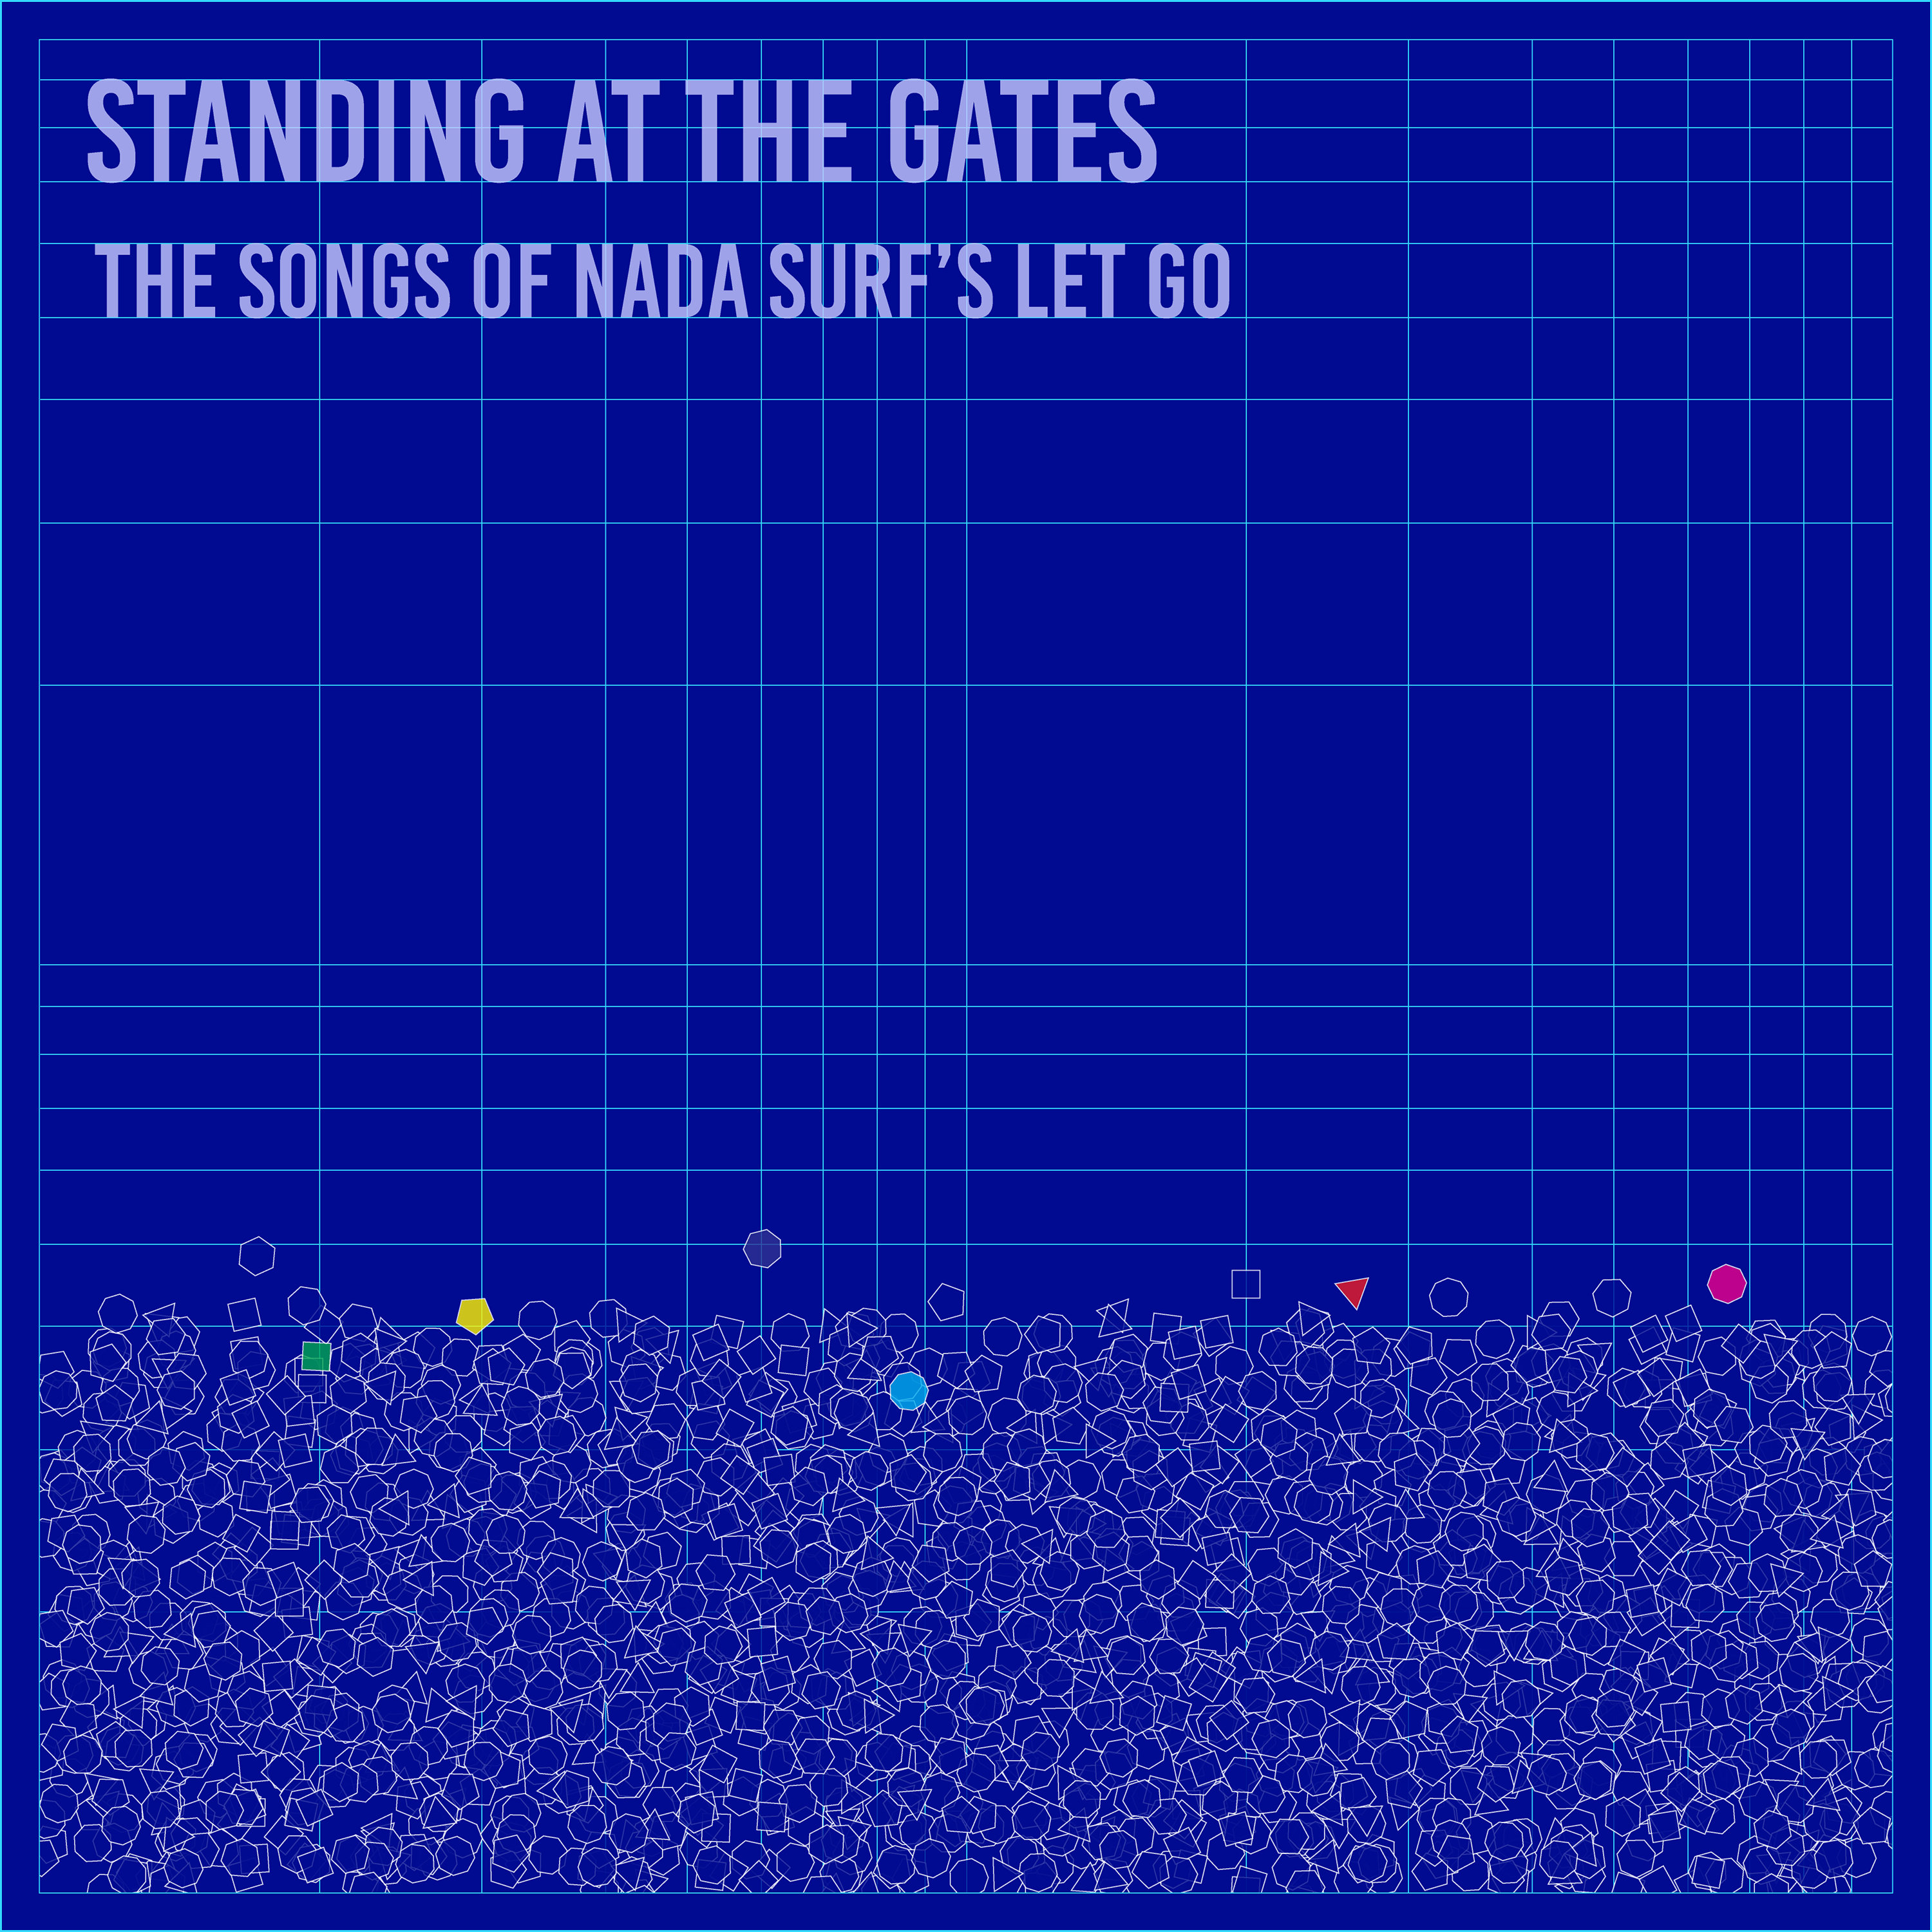 Standing at the Gates: The Songs of Nada Surf's Let Go